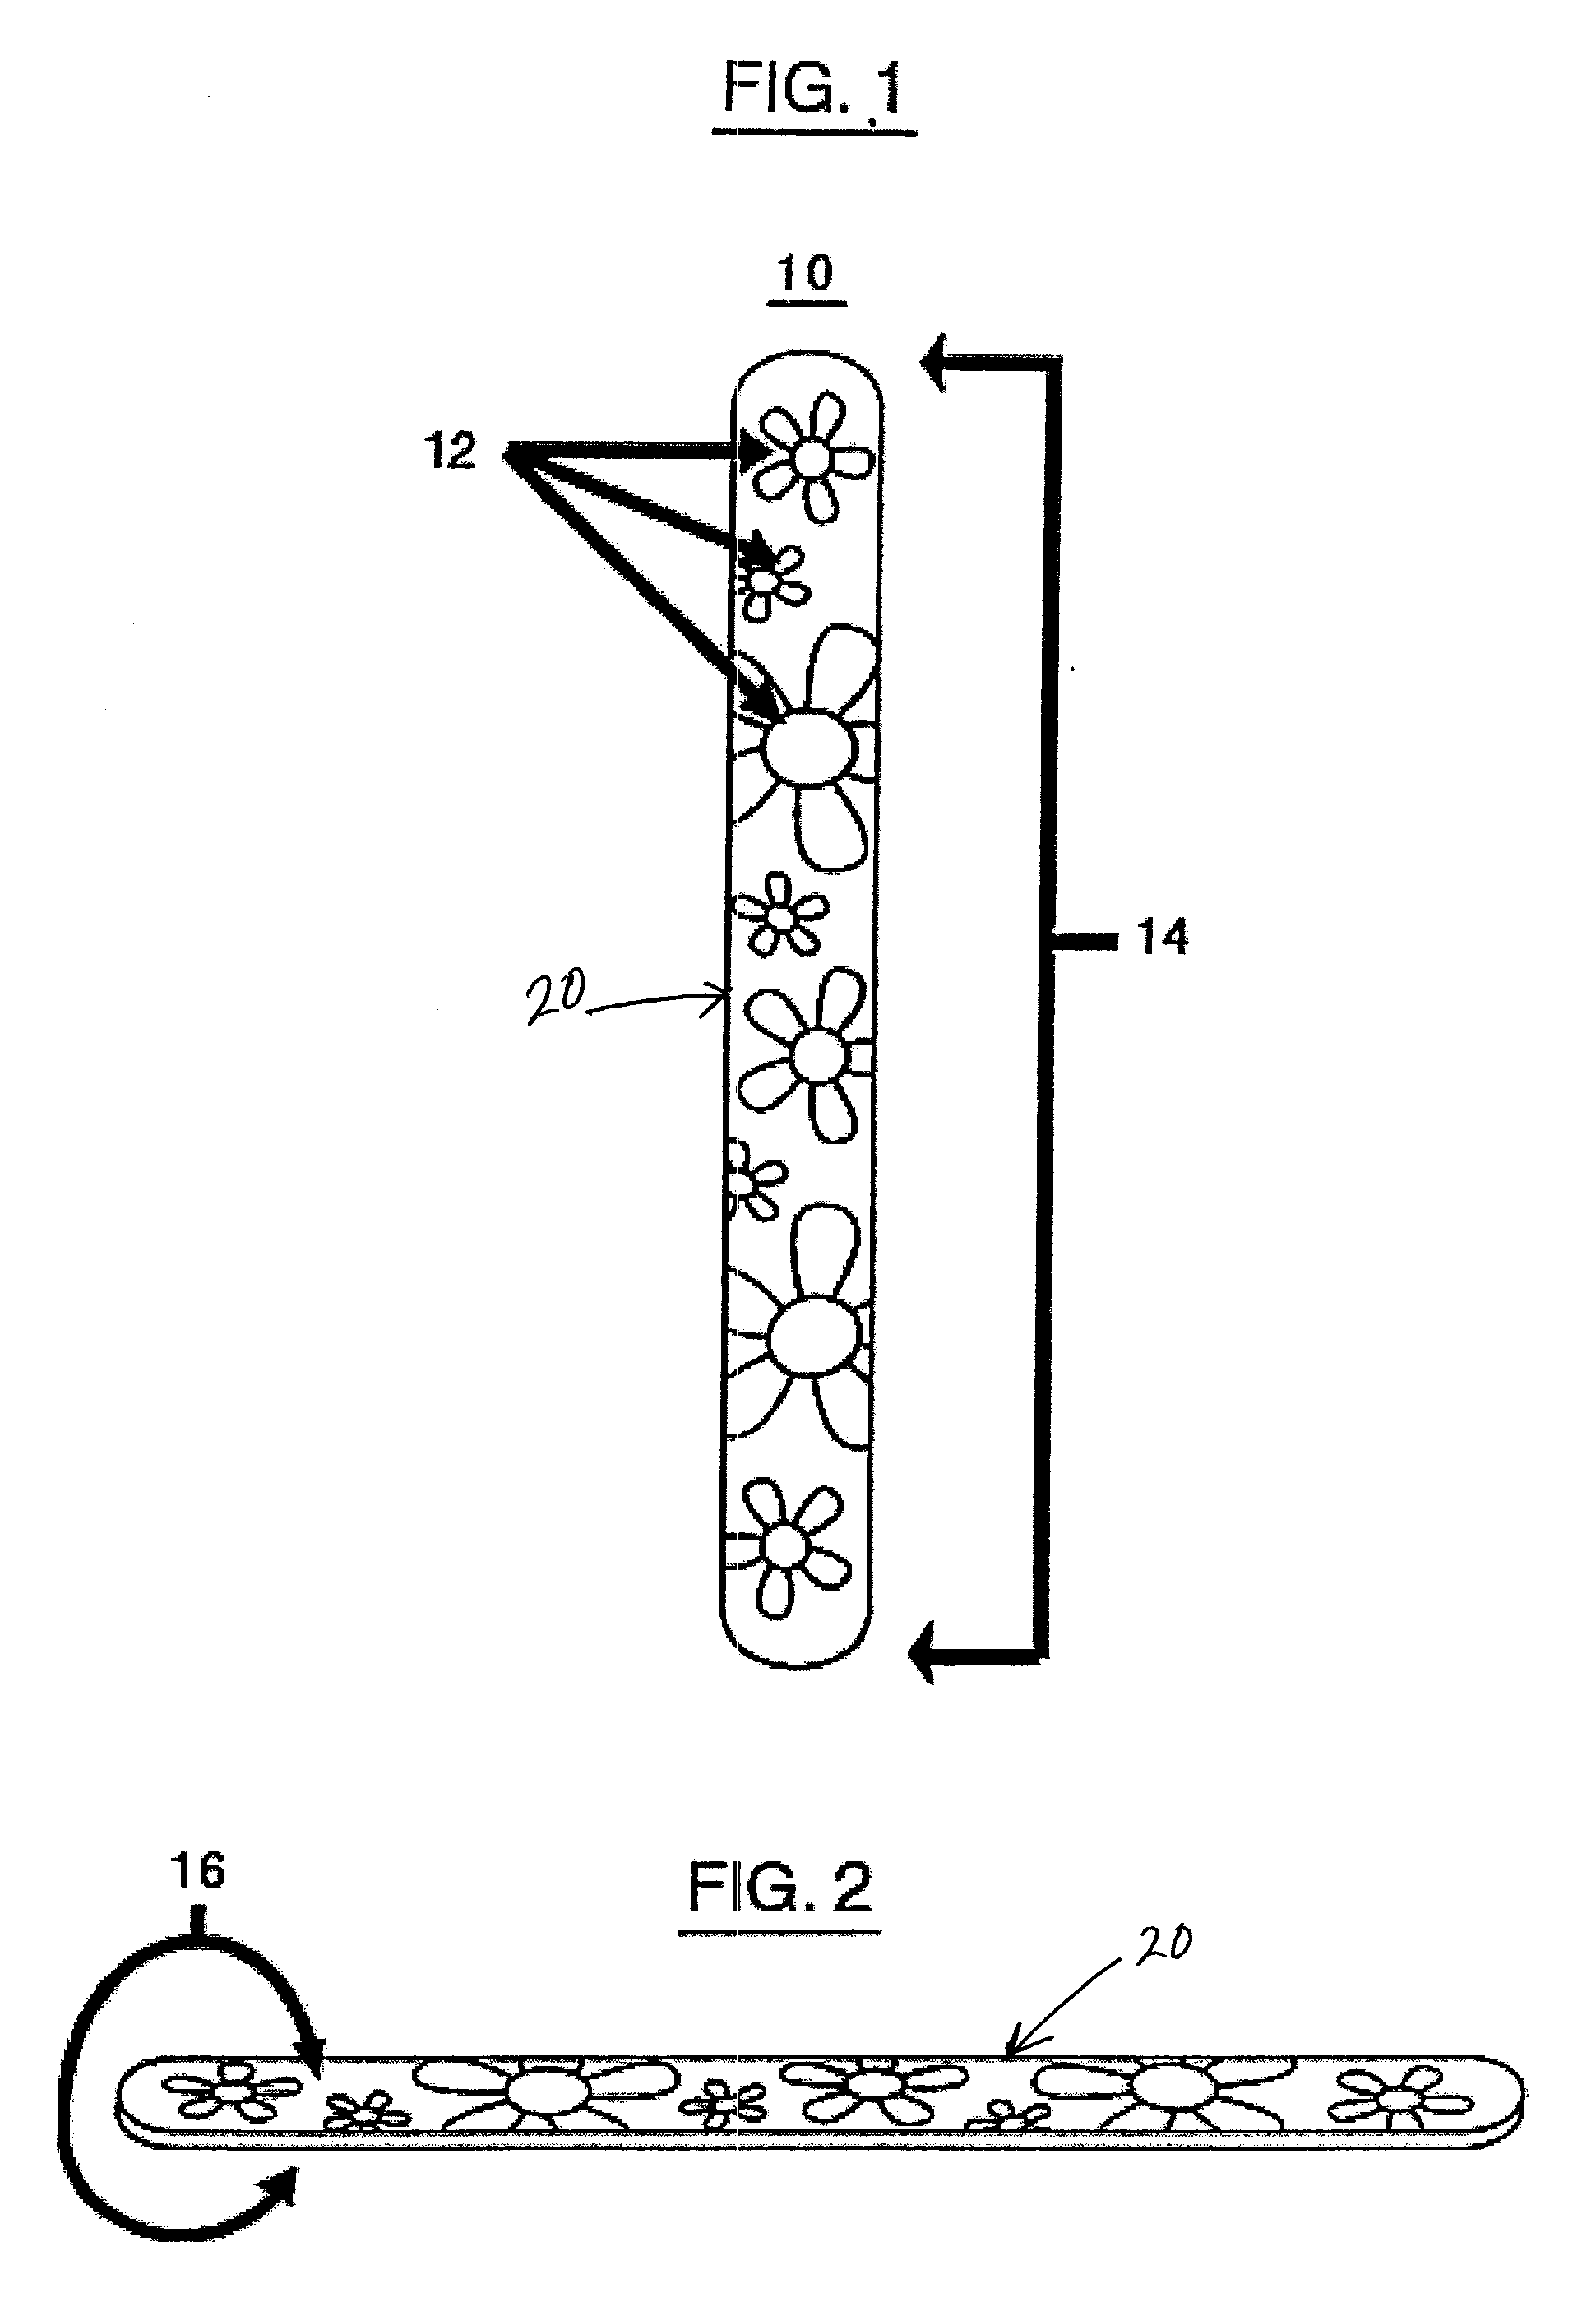 Method and apparatus for conducting an oral examination on youthful patients